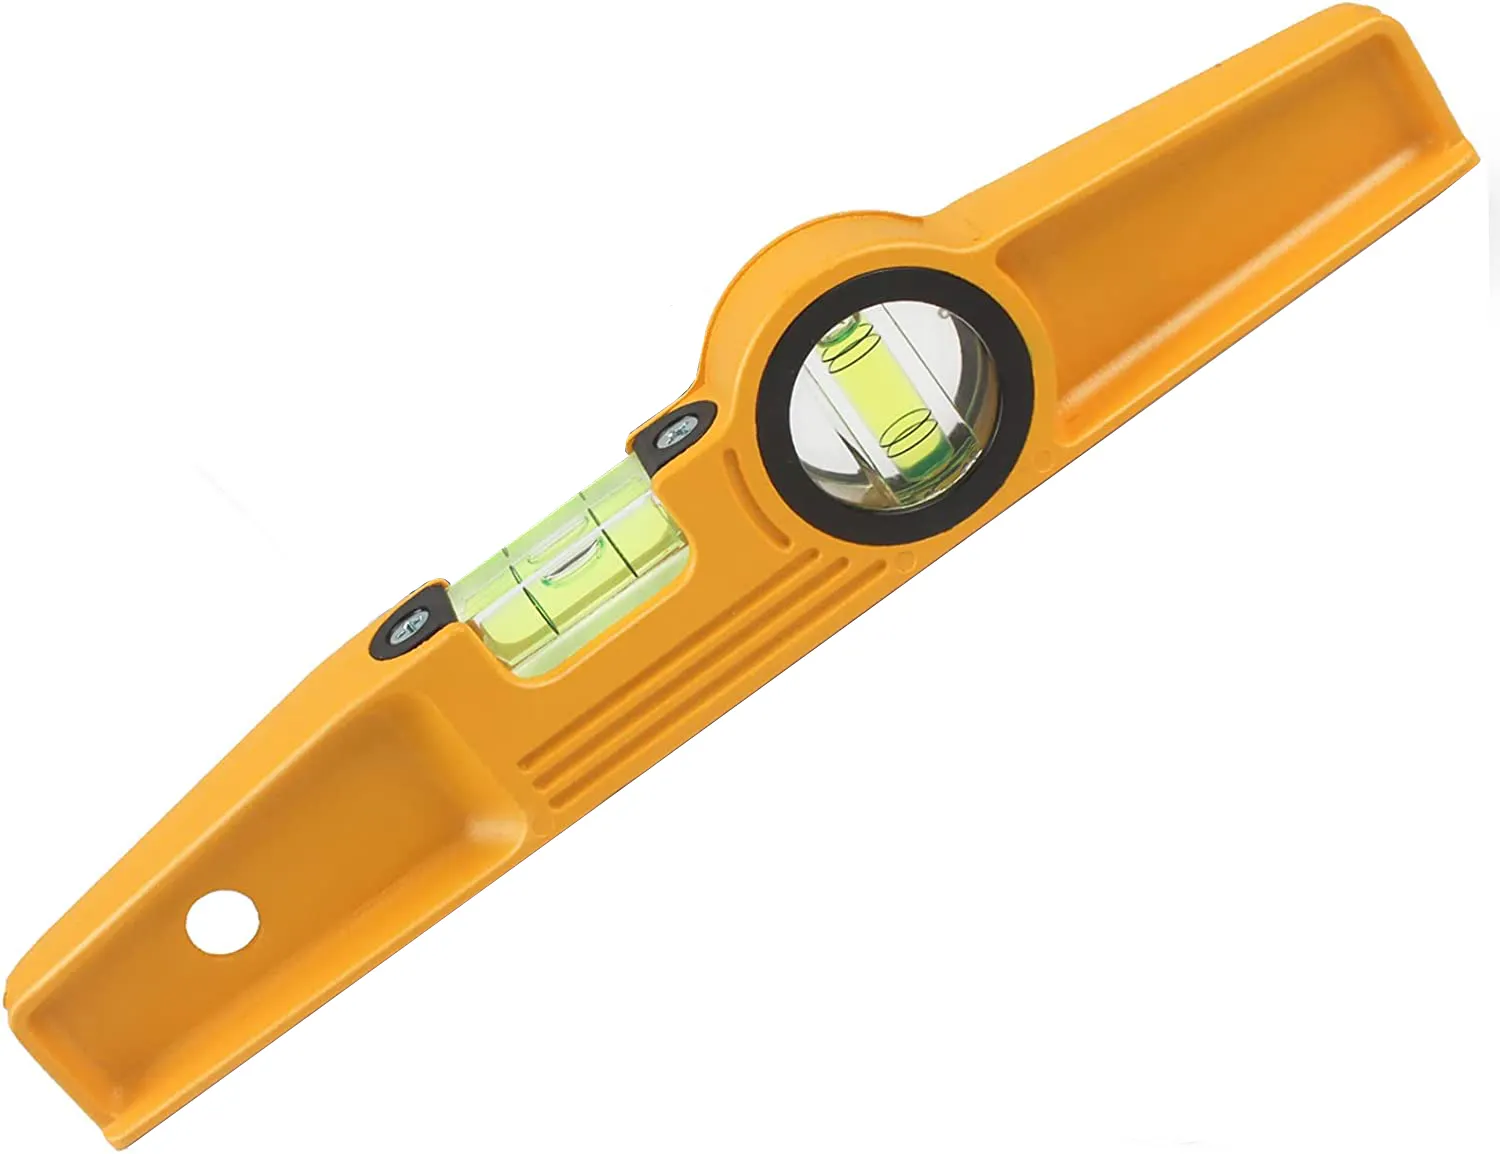 10 Inch Aluminum Torpedo Spirit Level High Accuracy Bottom Magnetic 90/180 Degree Bubbles Two Readable Shock Resistant Bubbles